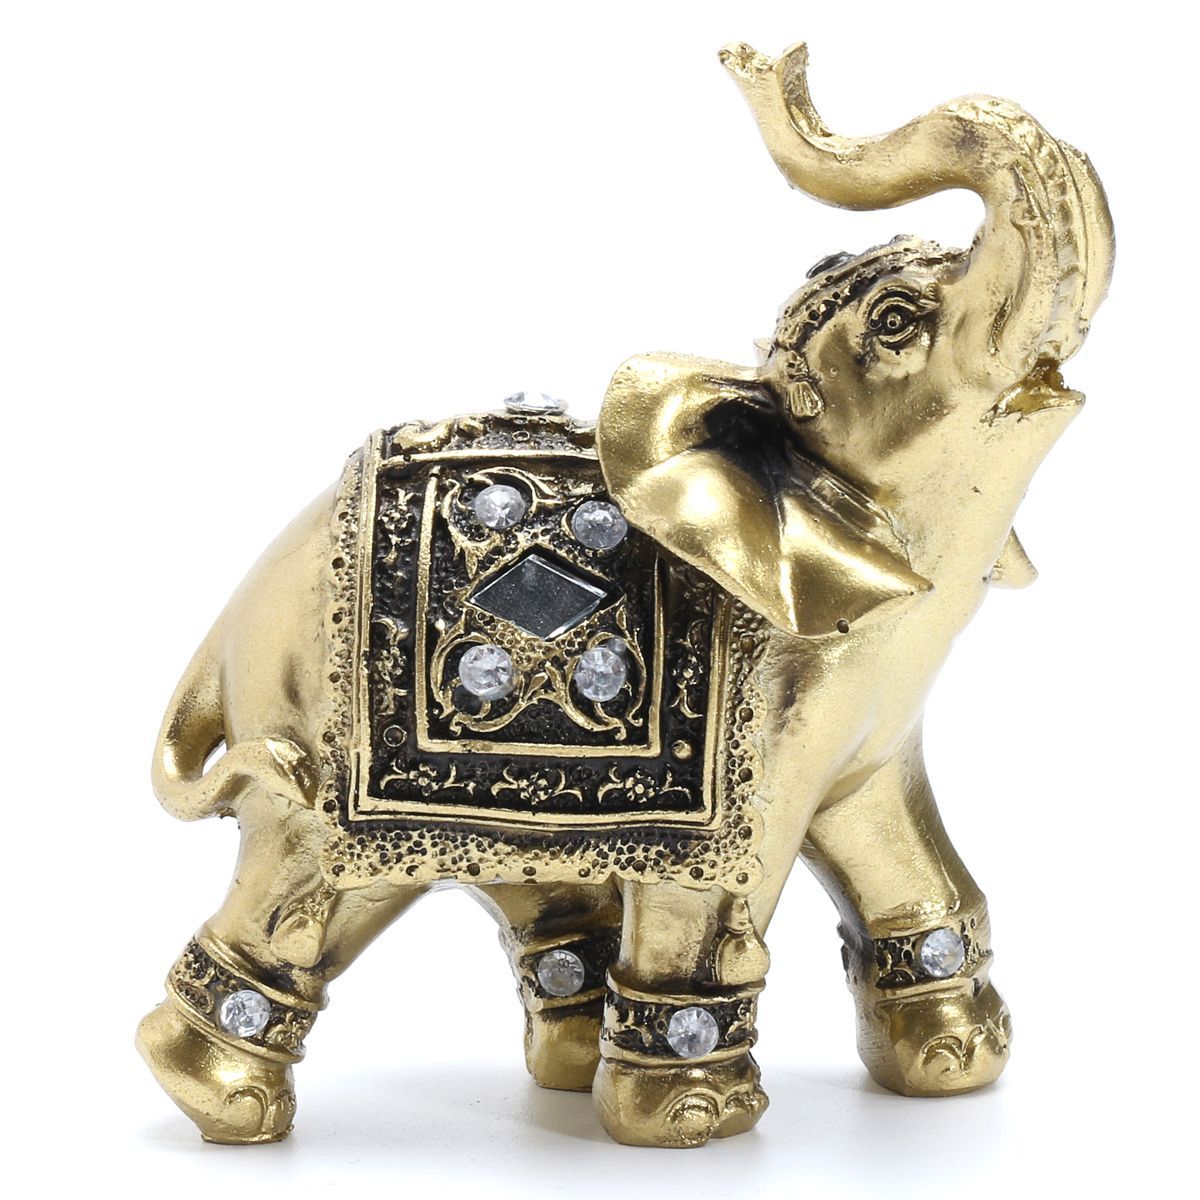 Resin-Feng-Shui-Elephant-Trunk-Statue-Lucky-Wealth-Figurine-Home-Decoration-1224512